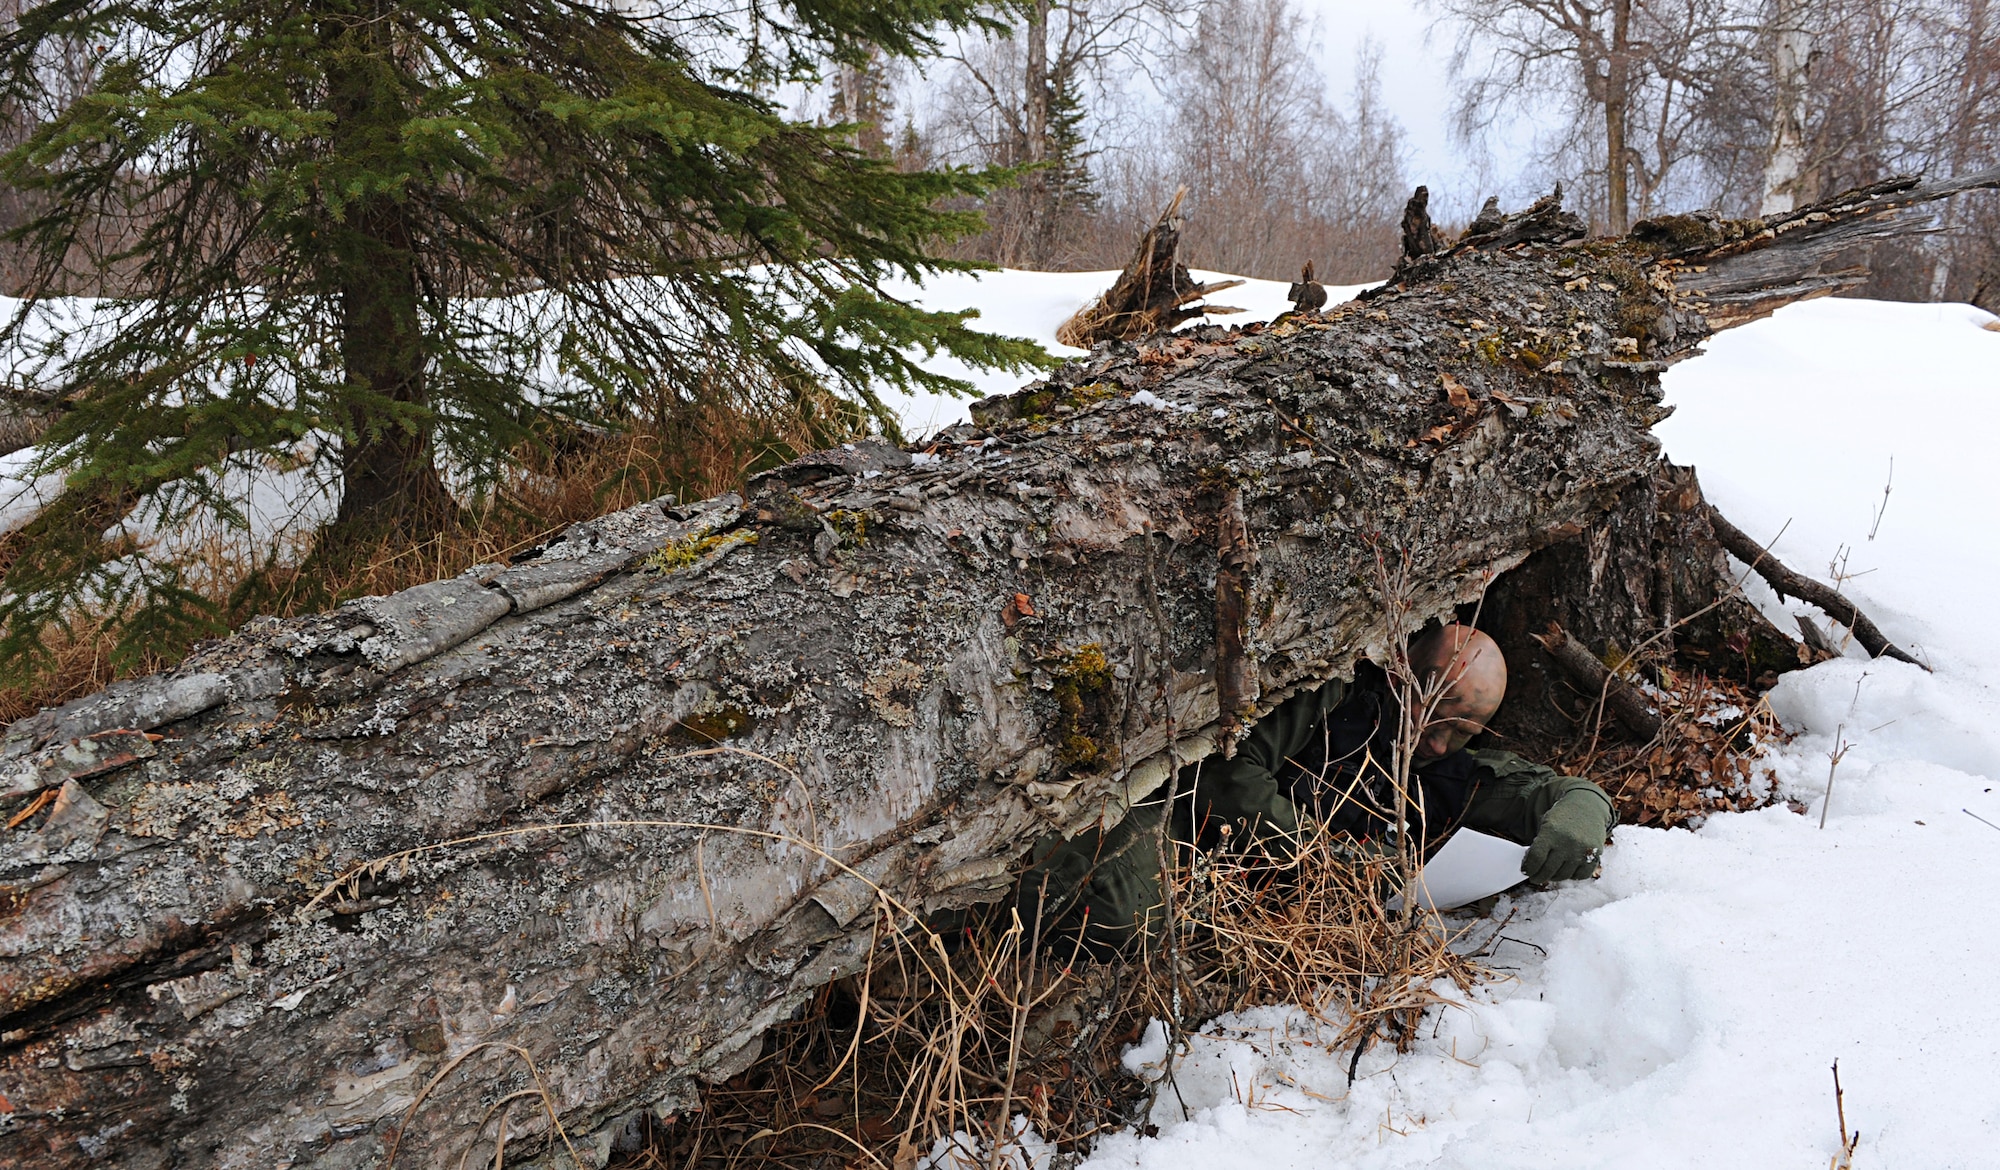 ELMENDORF AIR FORCE BASE, Alaska -- Master Sgt. Andrew Schultz conceals himself under a fallen tree while checking coordinates on a map during survival, evasion, resistance and escape field training operations April 12. Airmen with the 962nd Airborne Air Control Squadron had to navigate through the woods using a map, compass and GPS unit while concealing themselves in the surrounding environment. Sergeant Schultz is a communications system operator with the 962nd AACS. (Air Force photo by Senior Airman Cynthia Spalding)